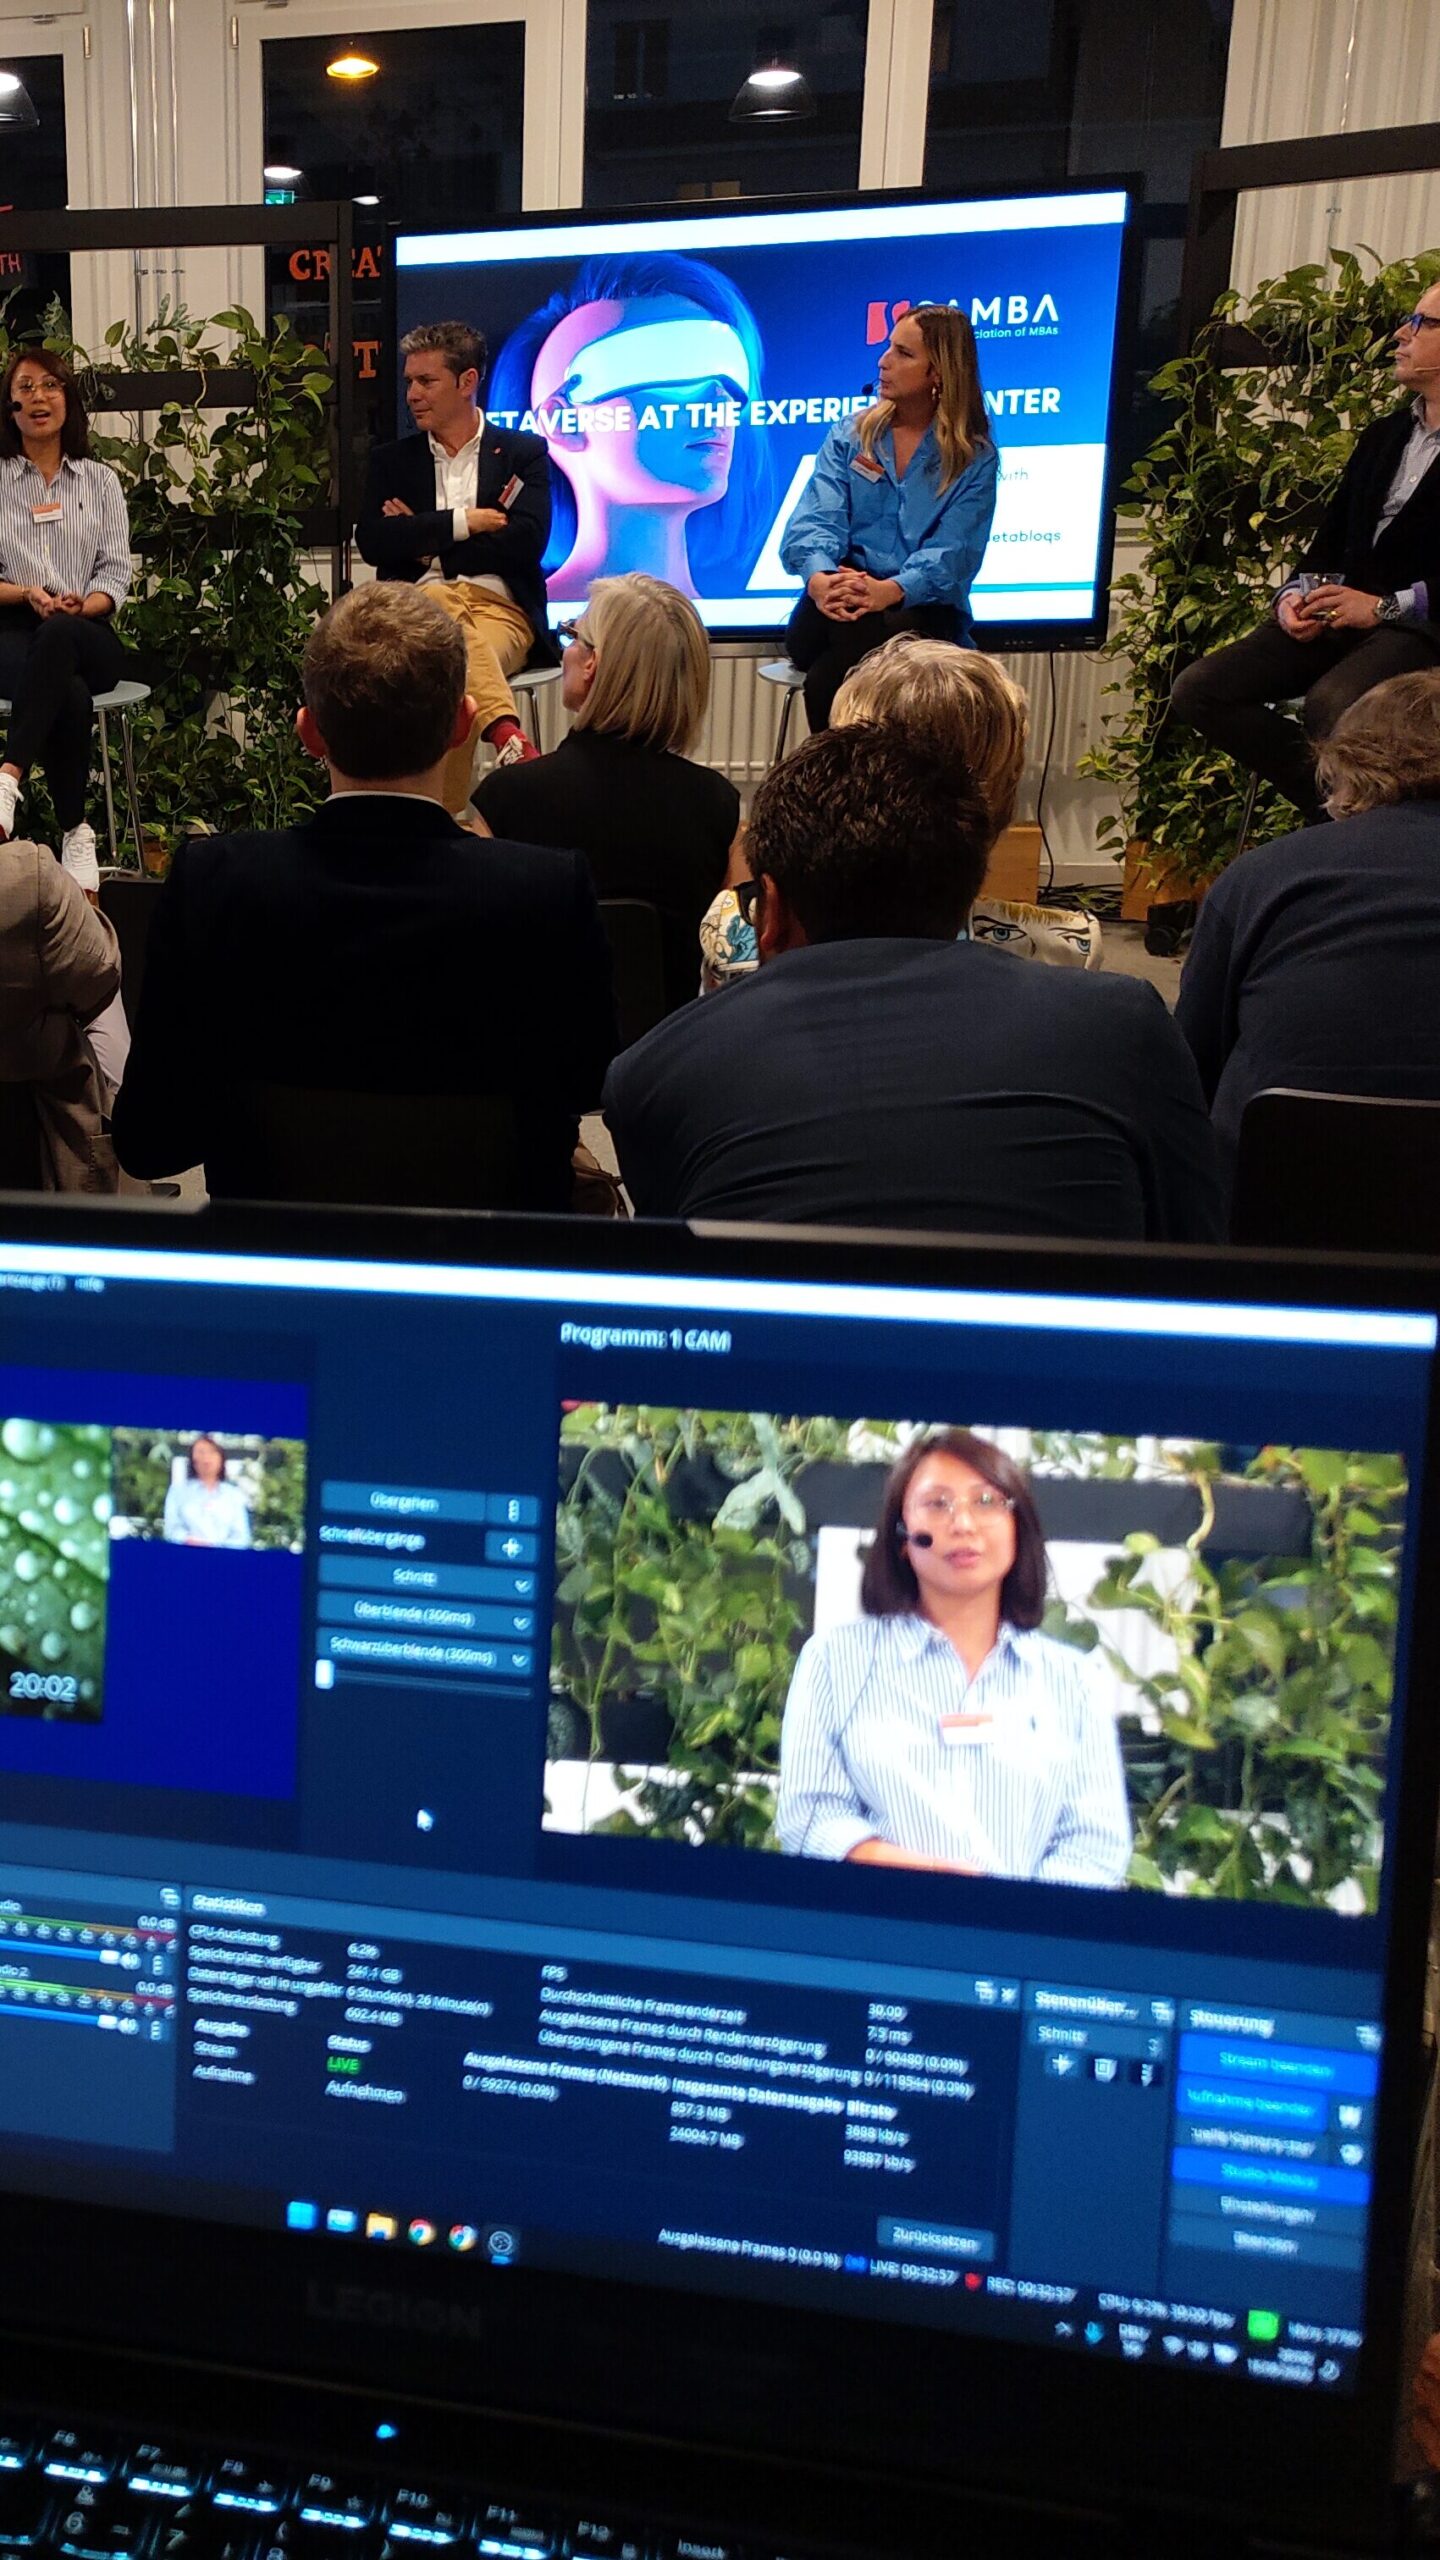 Hybrid live streaming of an event